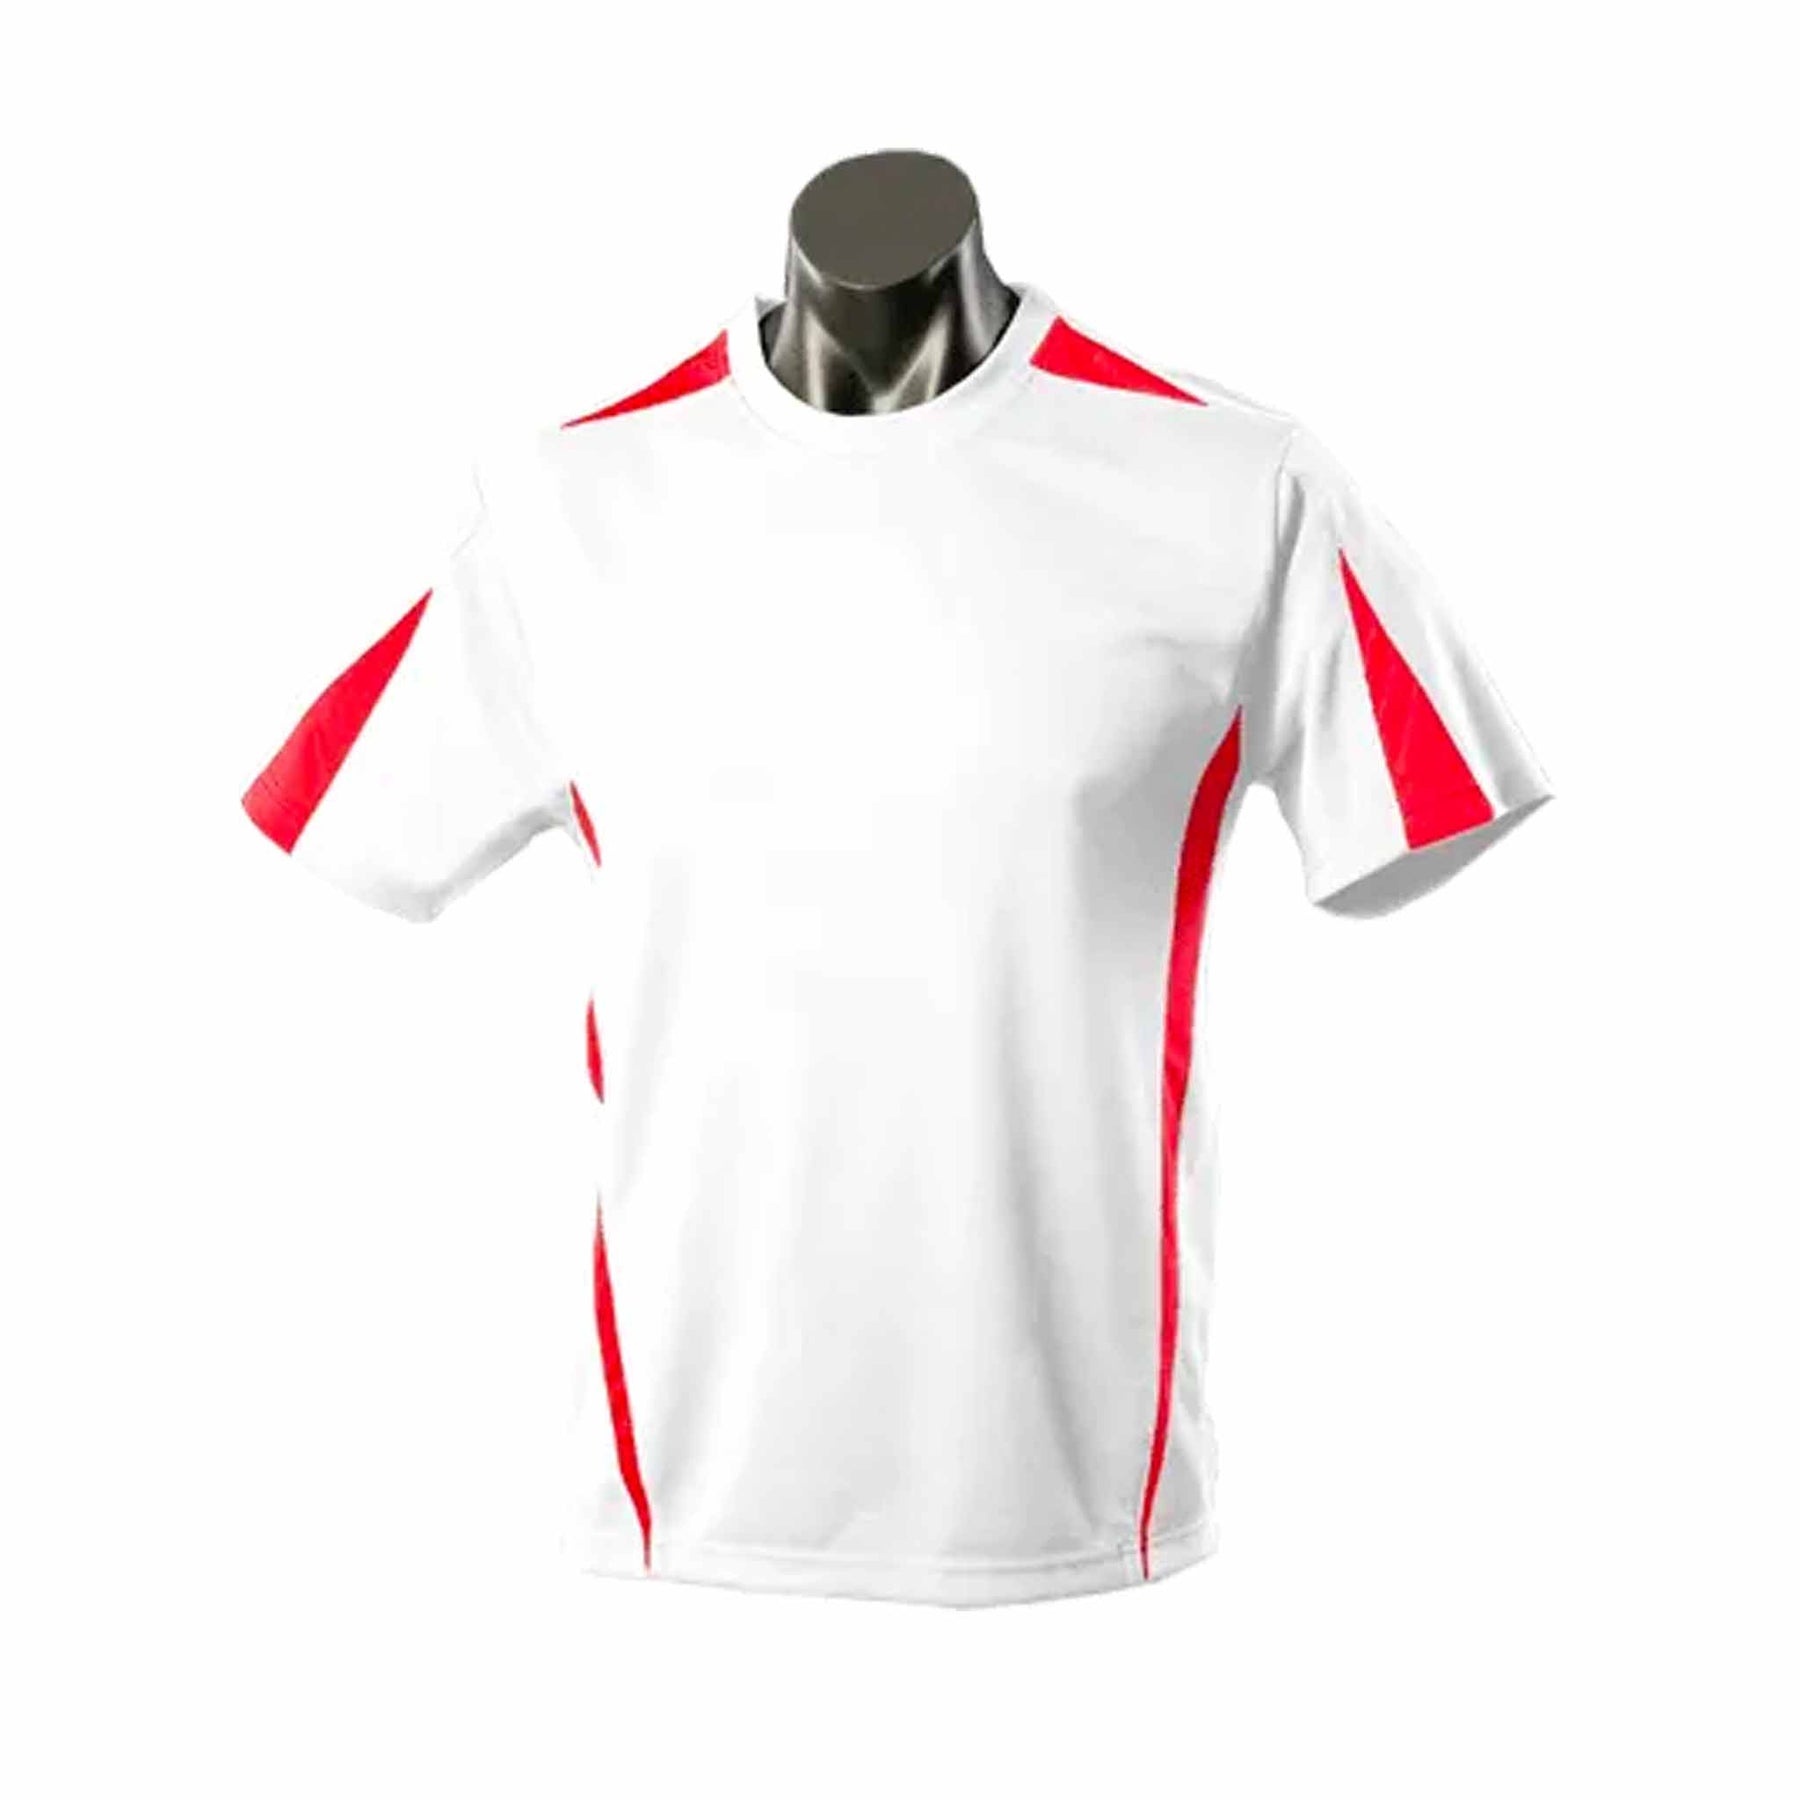 aussie pacific eureka mens tee in white red